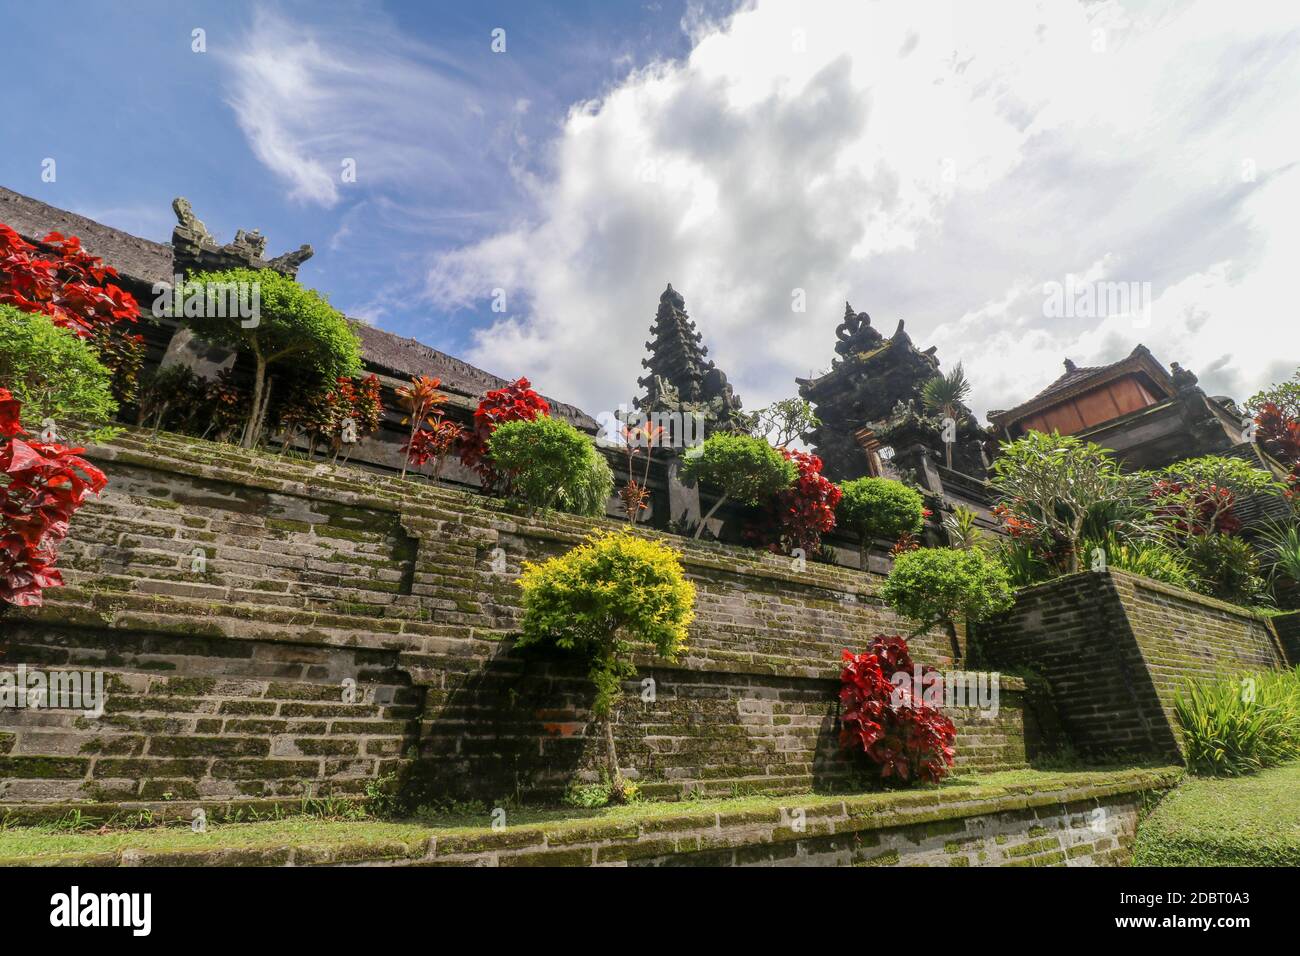 Temples in Pura Penataran Agung Besakih complex, the mother temple of Bali Island, Indonesia. Green lawn with several balinese temples with Travel and Stock Photo